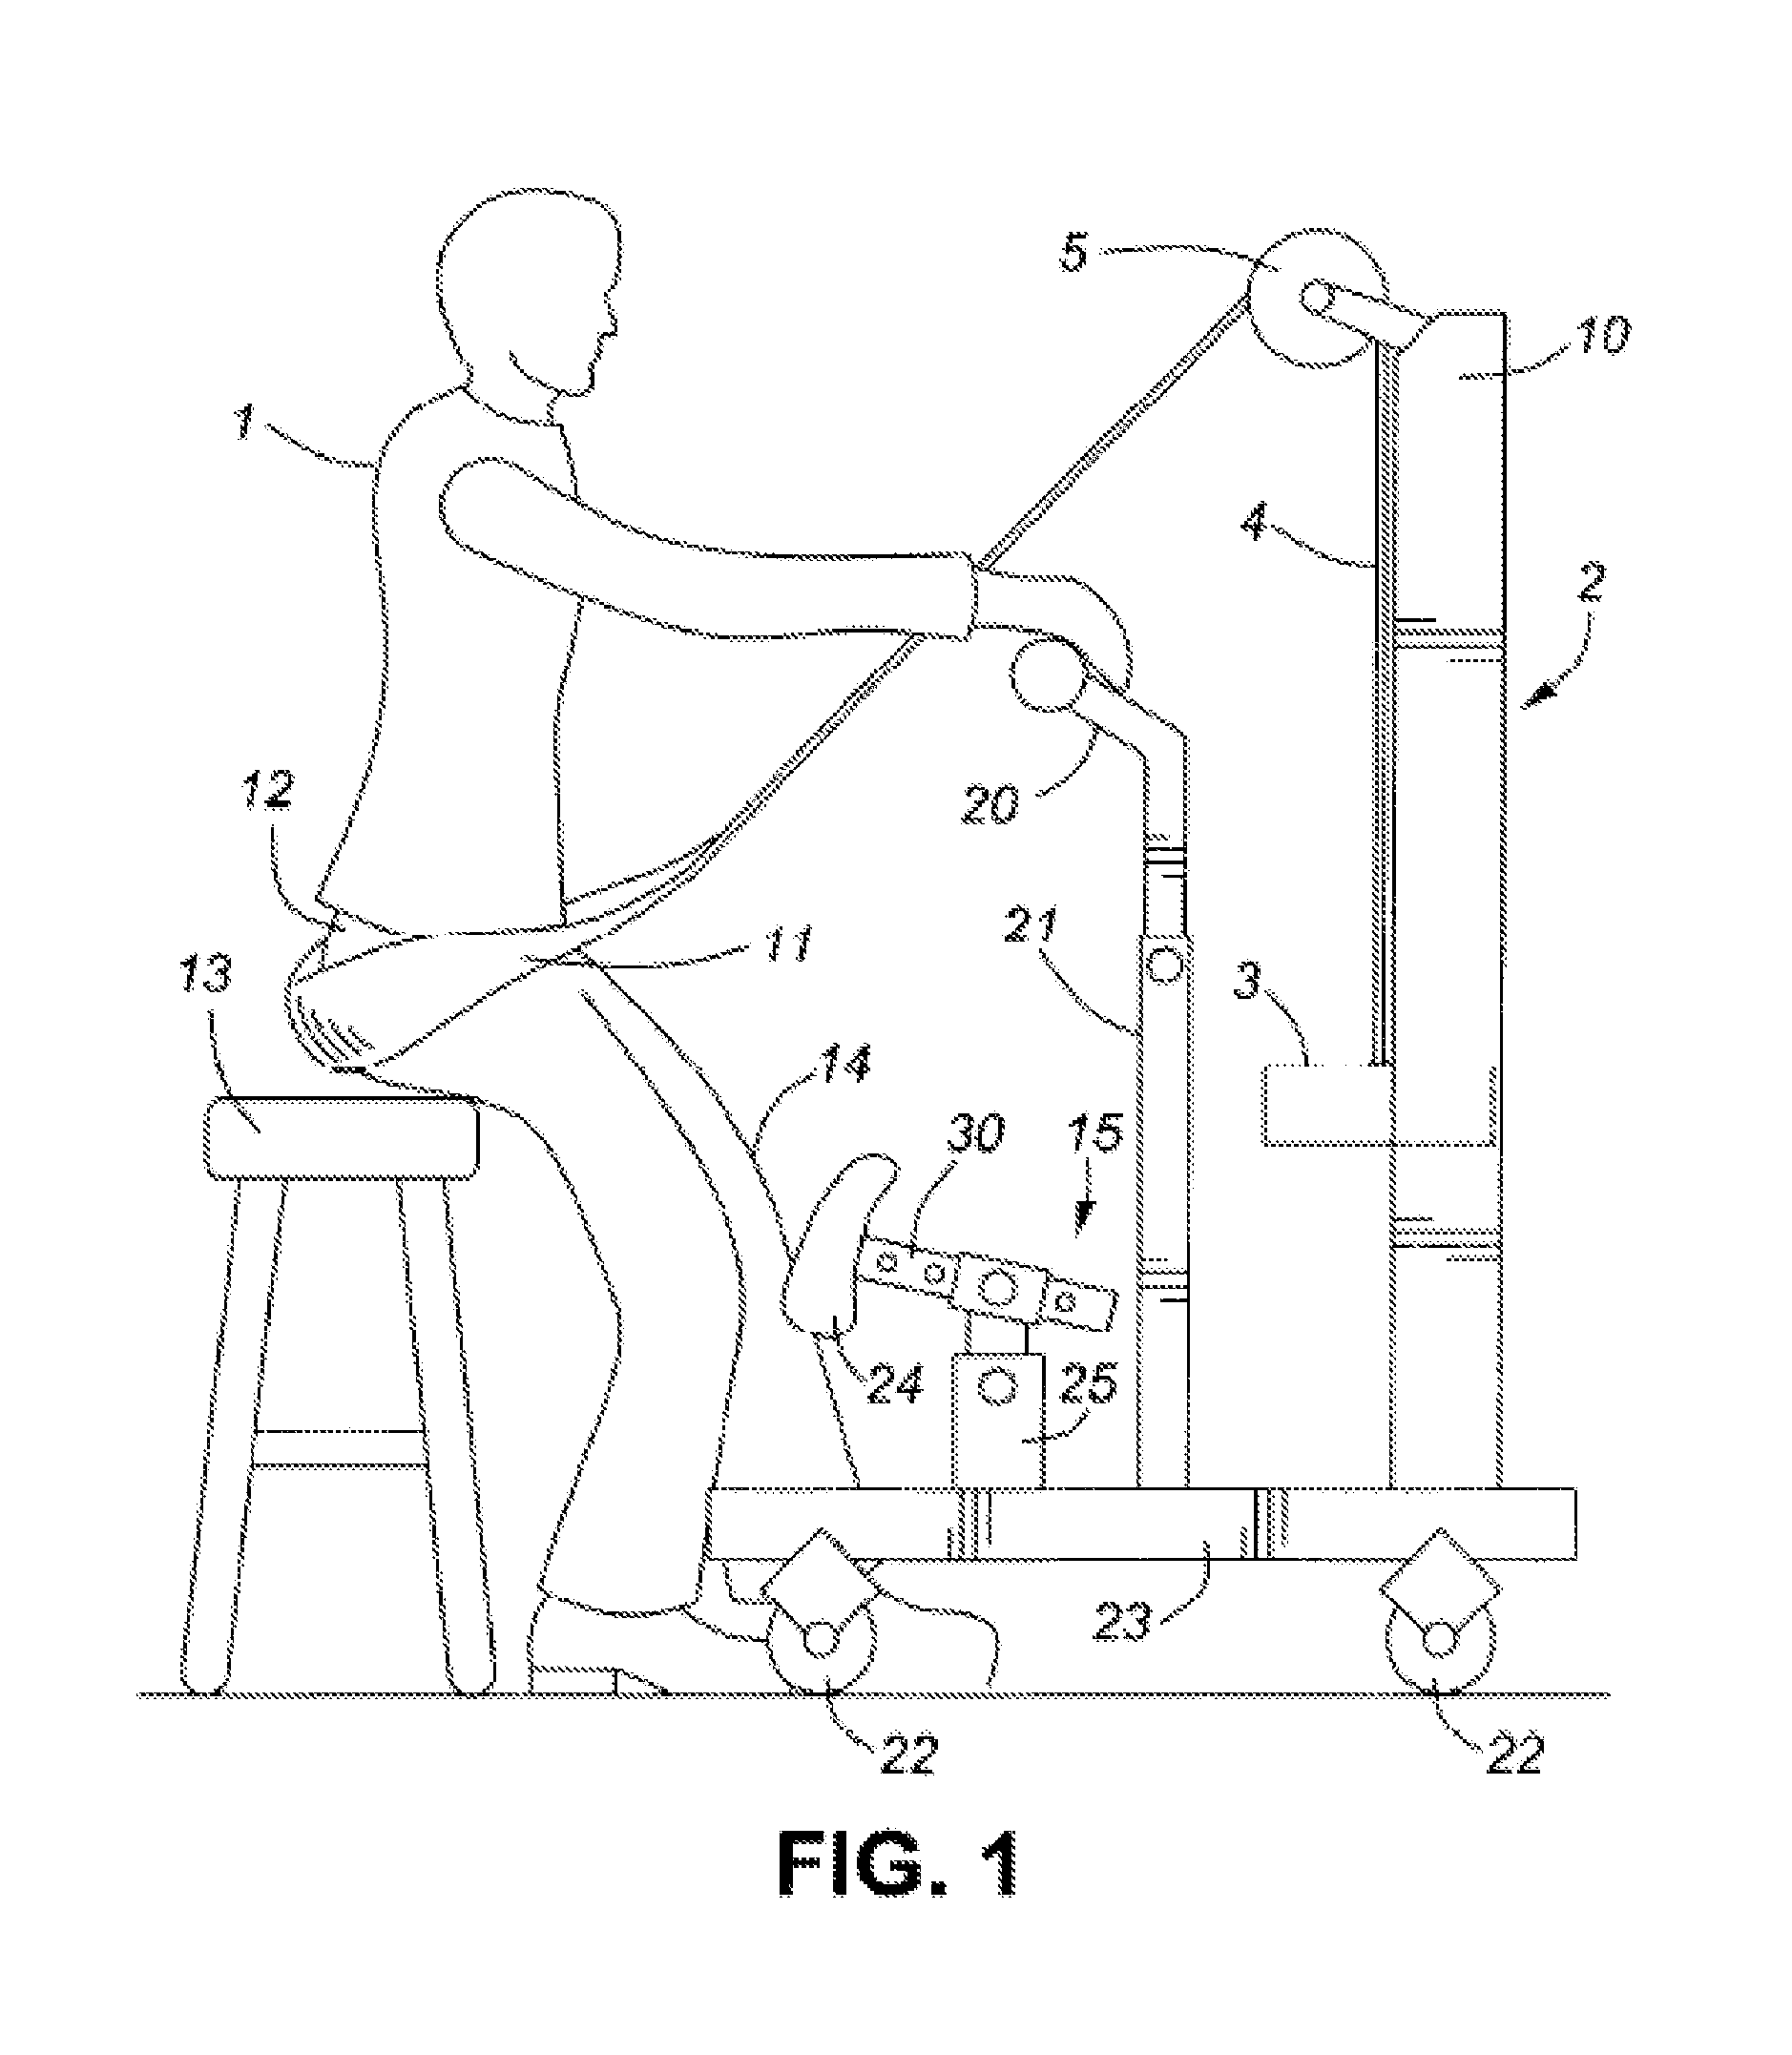 Apparatus for assisting a person to stand and walk